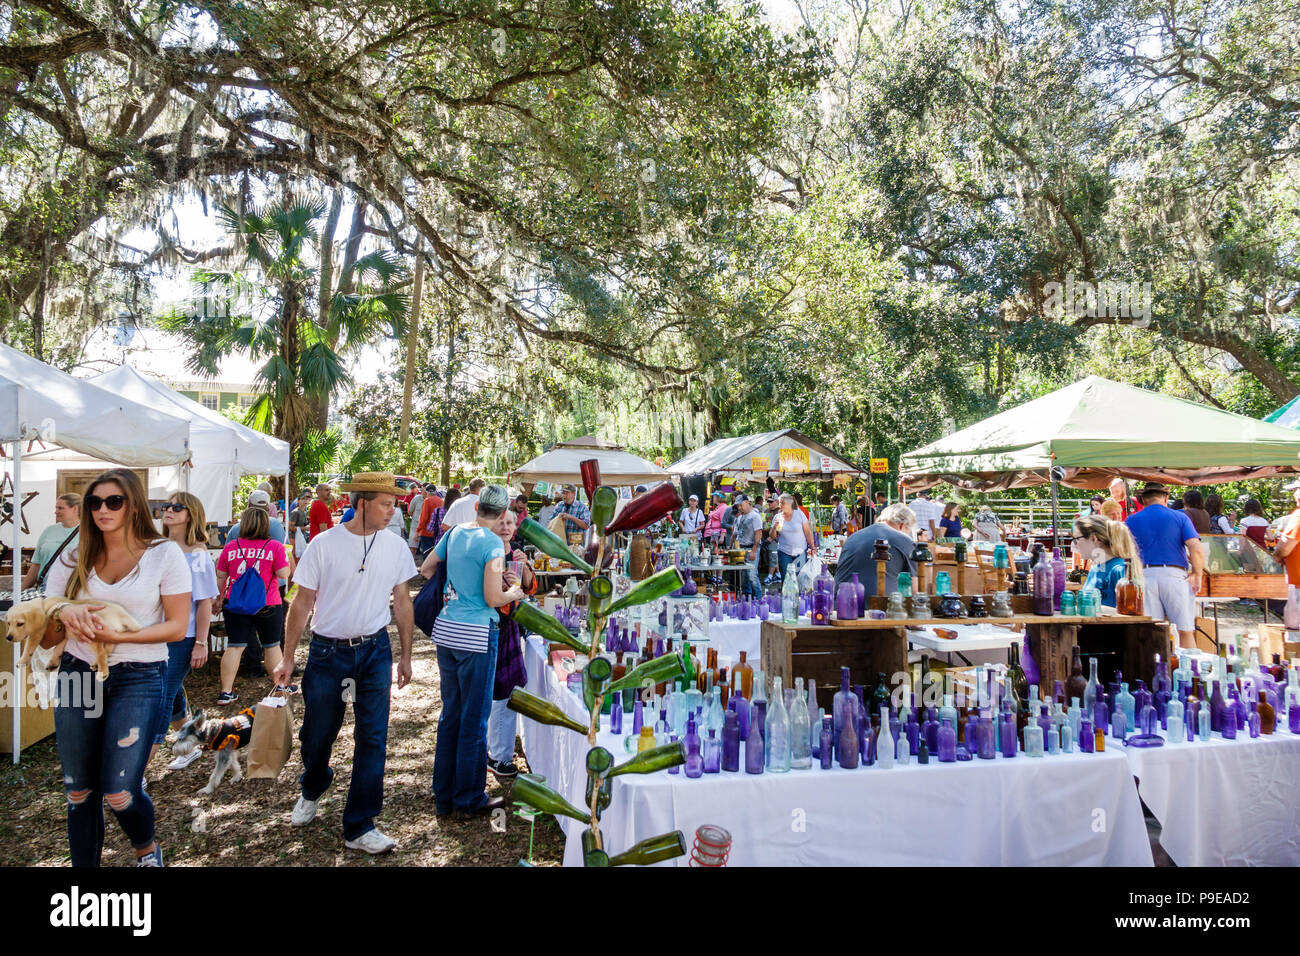 Florida,Micanopy,Fall Harvest Festival,annual small town community booths stalls vendors buying selling,fairgoer,bottle tree,display,glass,man men mal Stock Photo